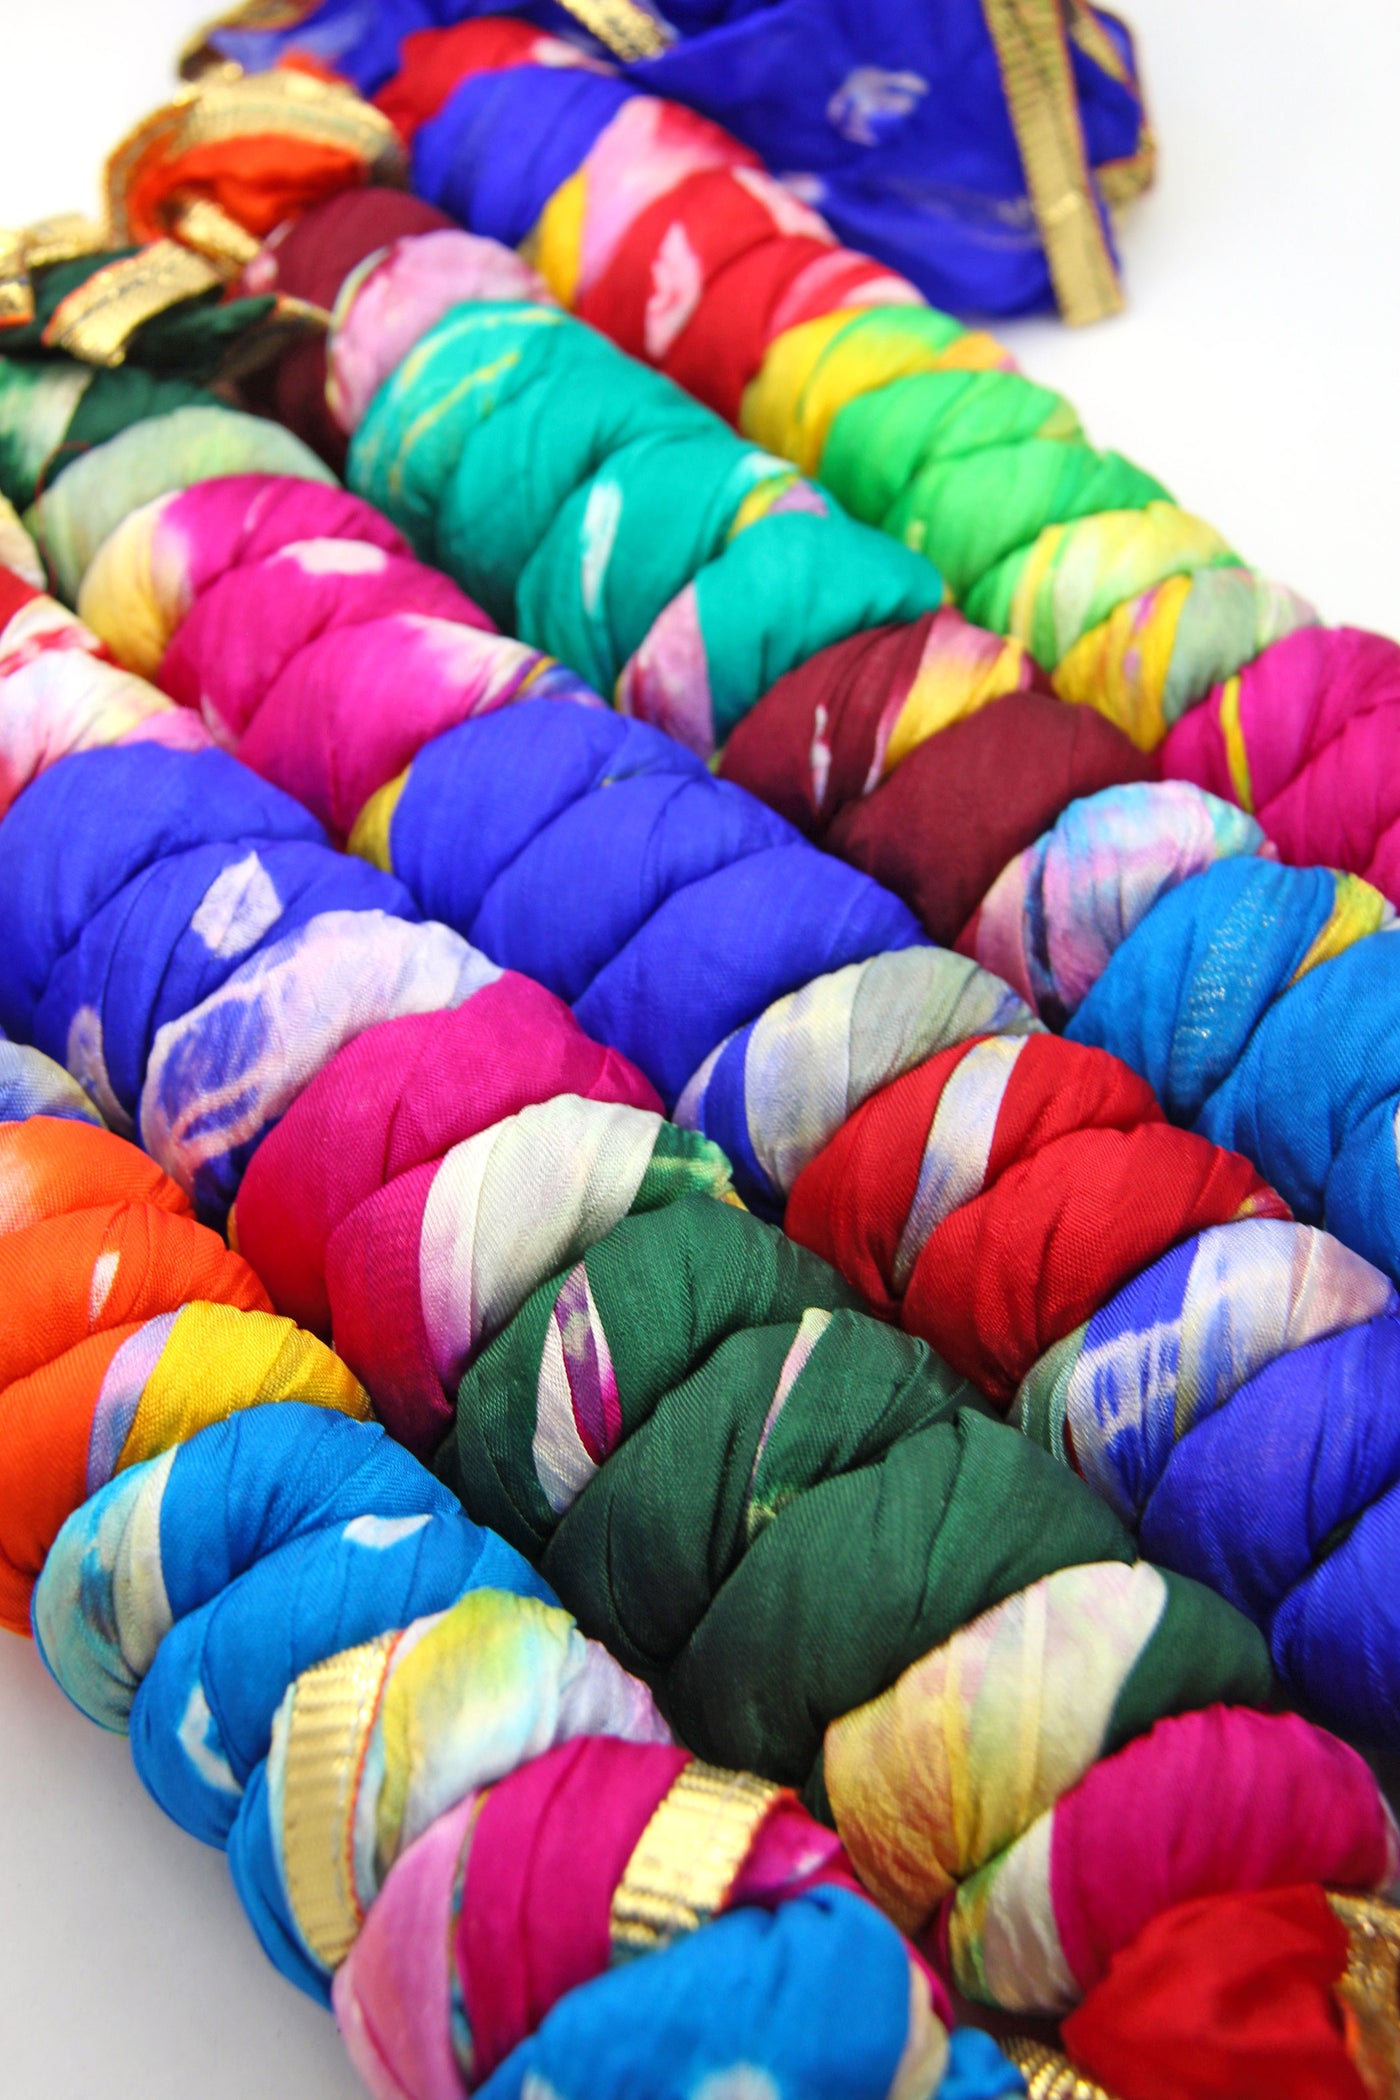 Wear your color boldly with these hand-dyed bandhani chiffon scarves.  